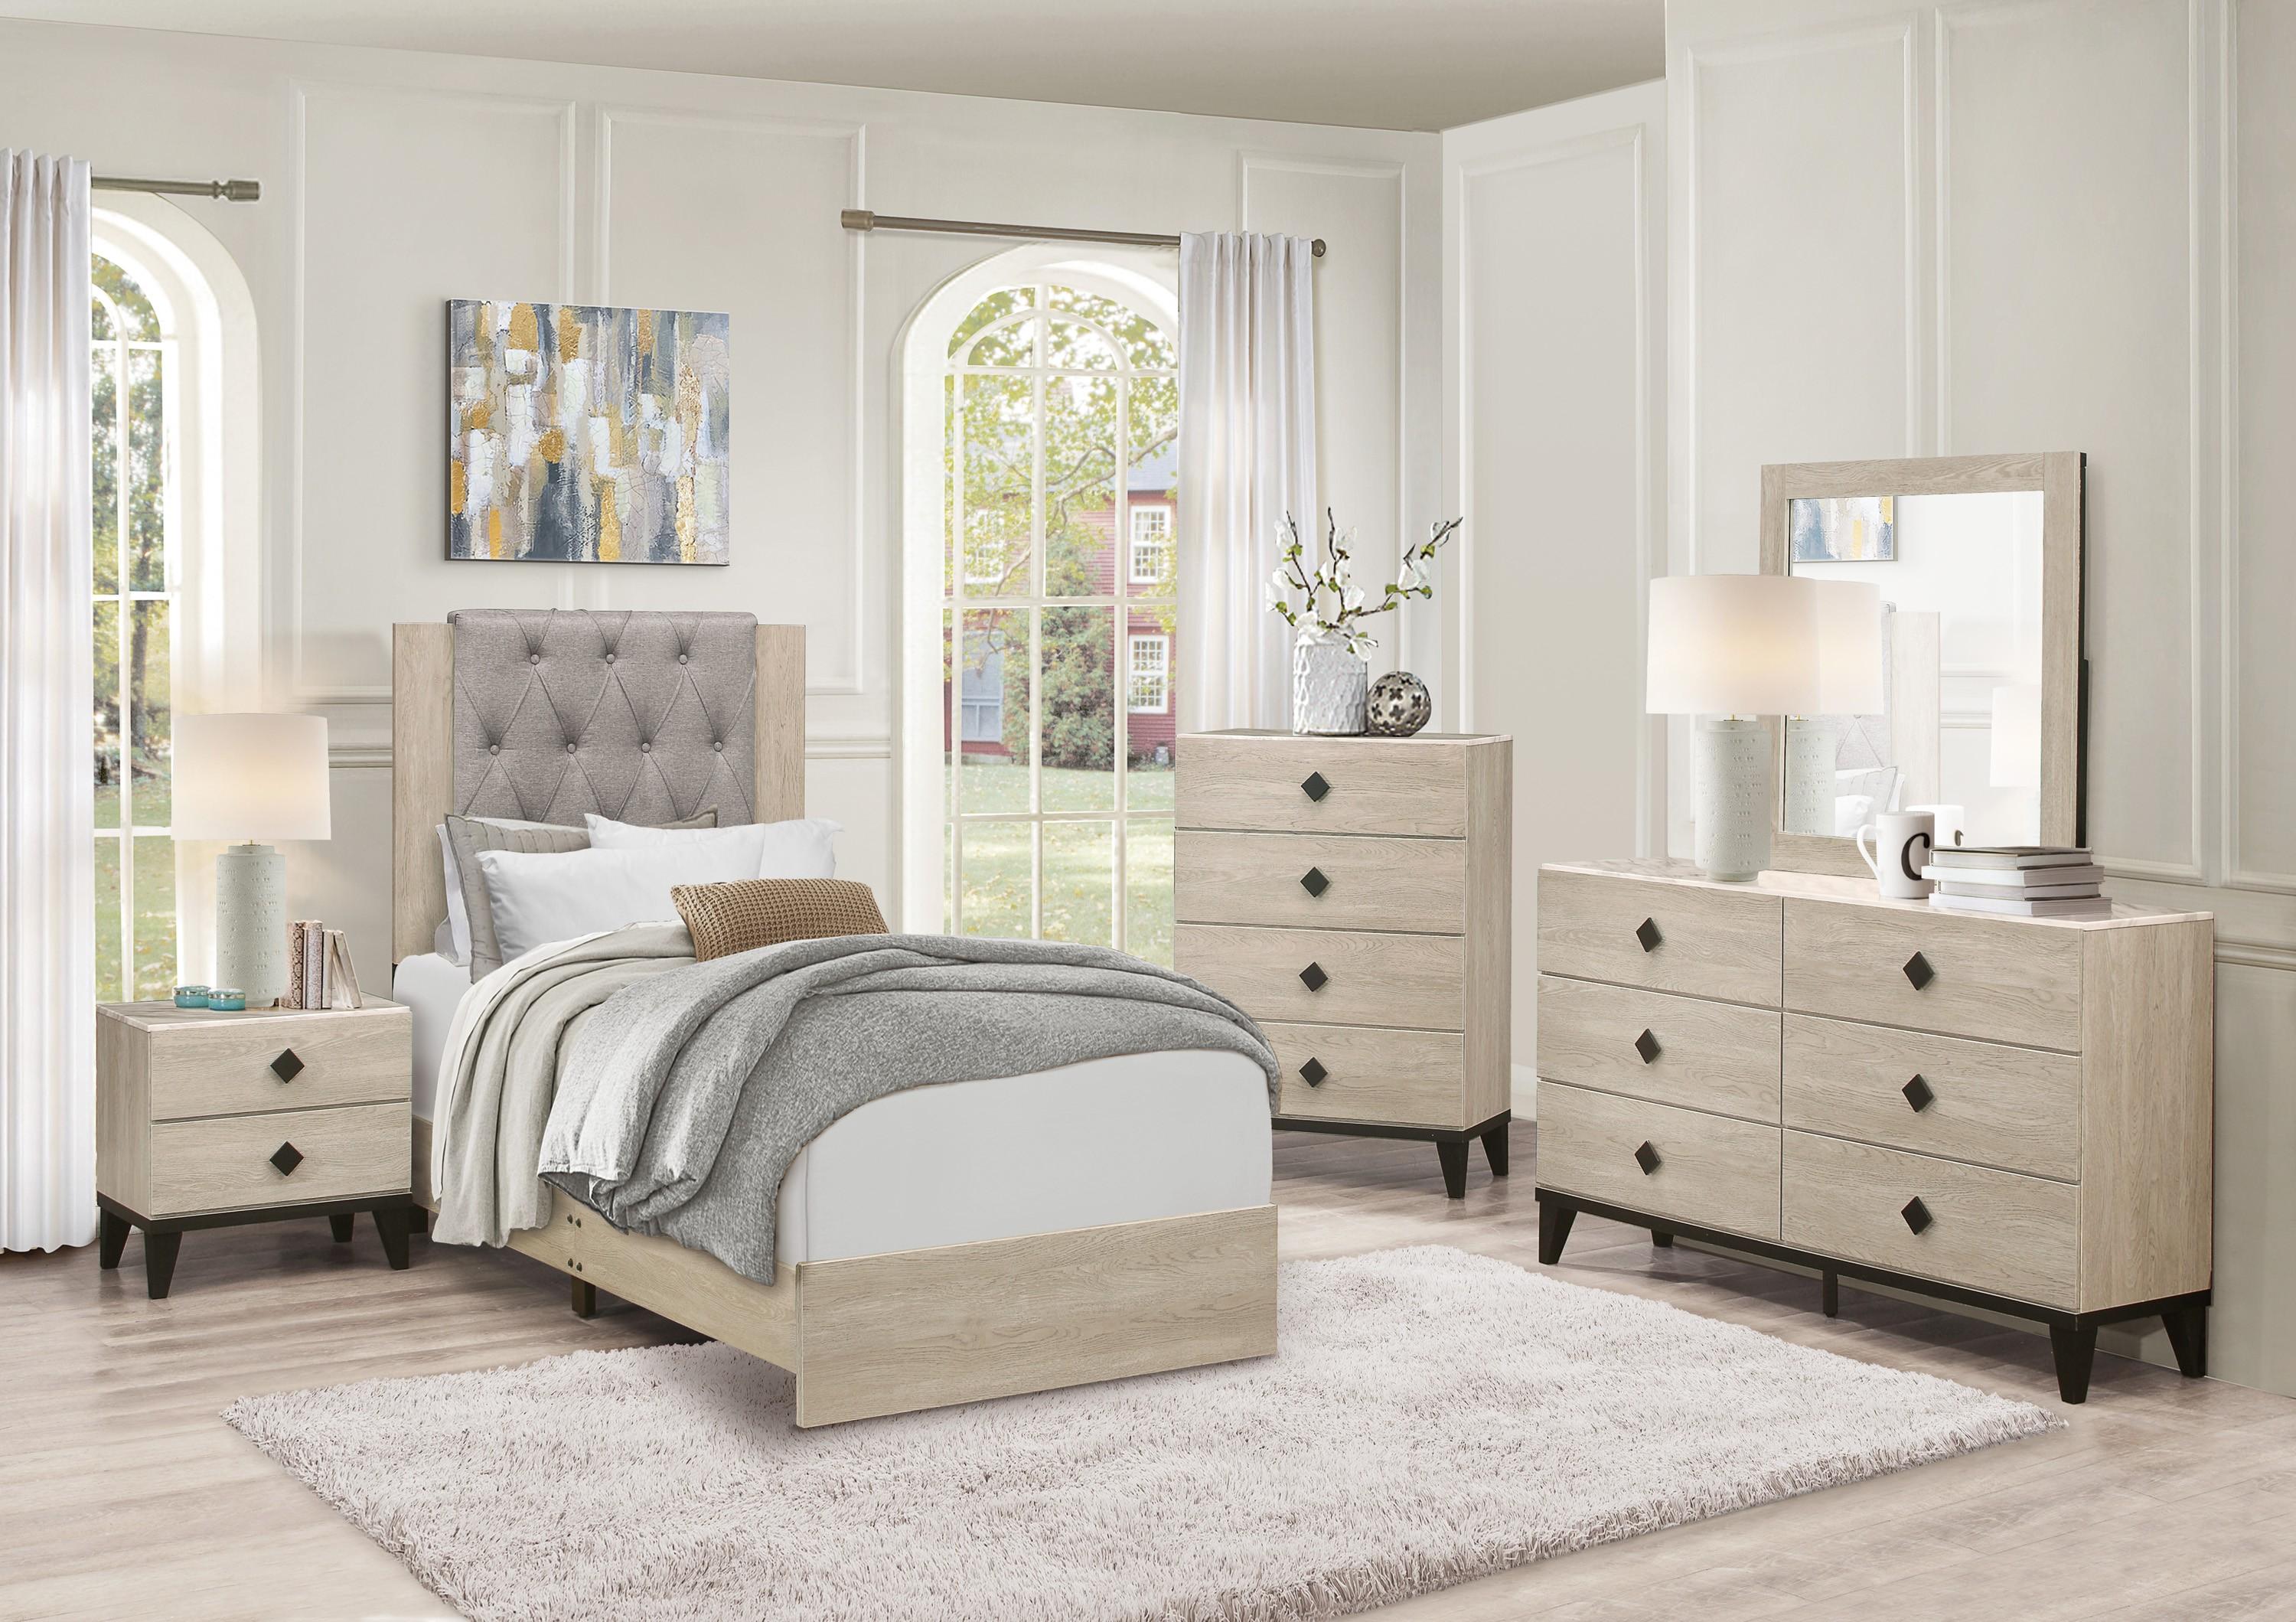 Modern Bedroom Set 1524T-1-6PC Whiting 1524T-1-6PC in Cream Polyester